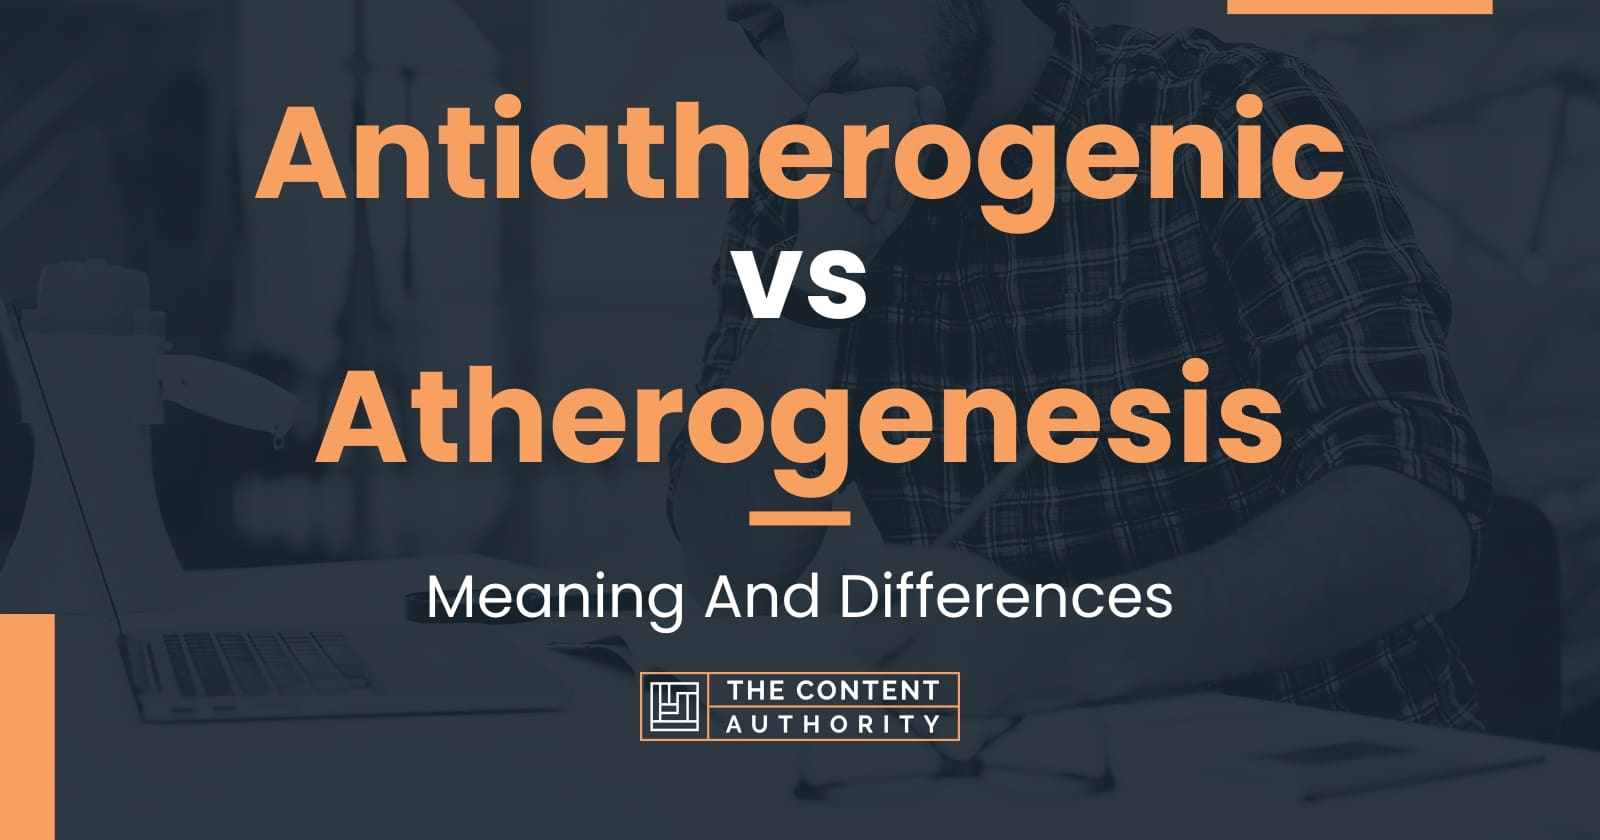 Antiatherogenic vs Atherogenesis: Meaning And Differences